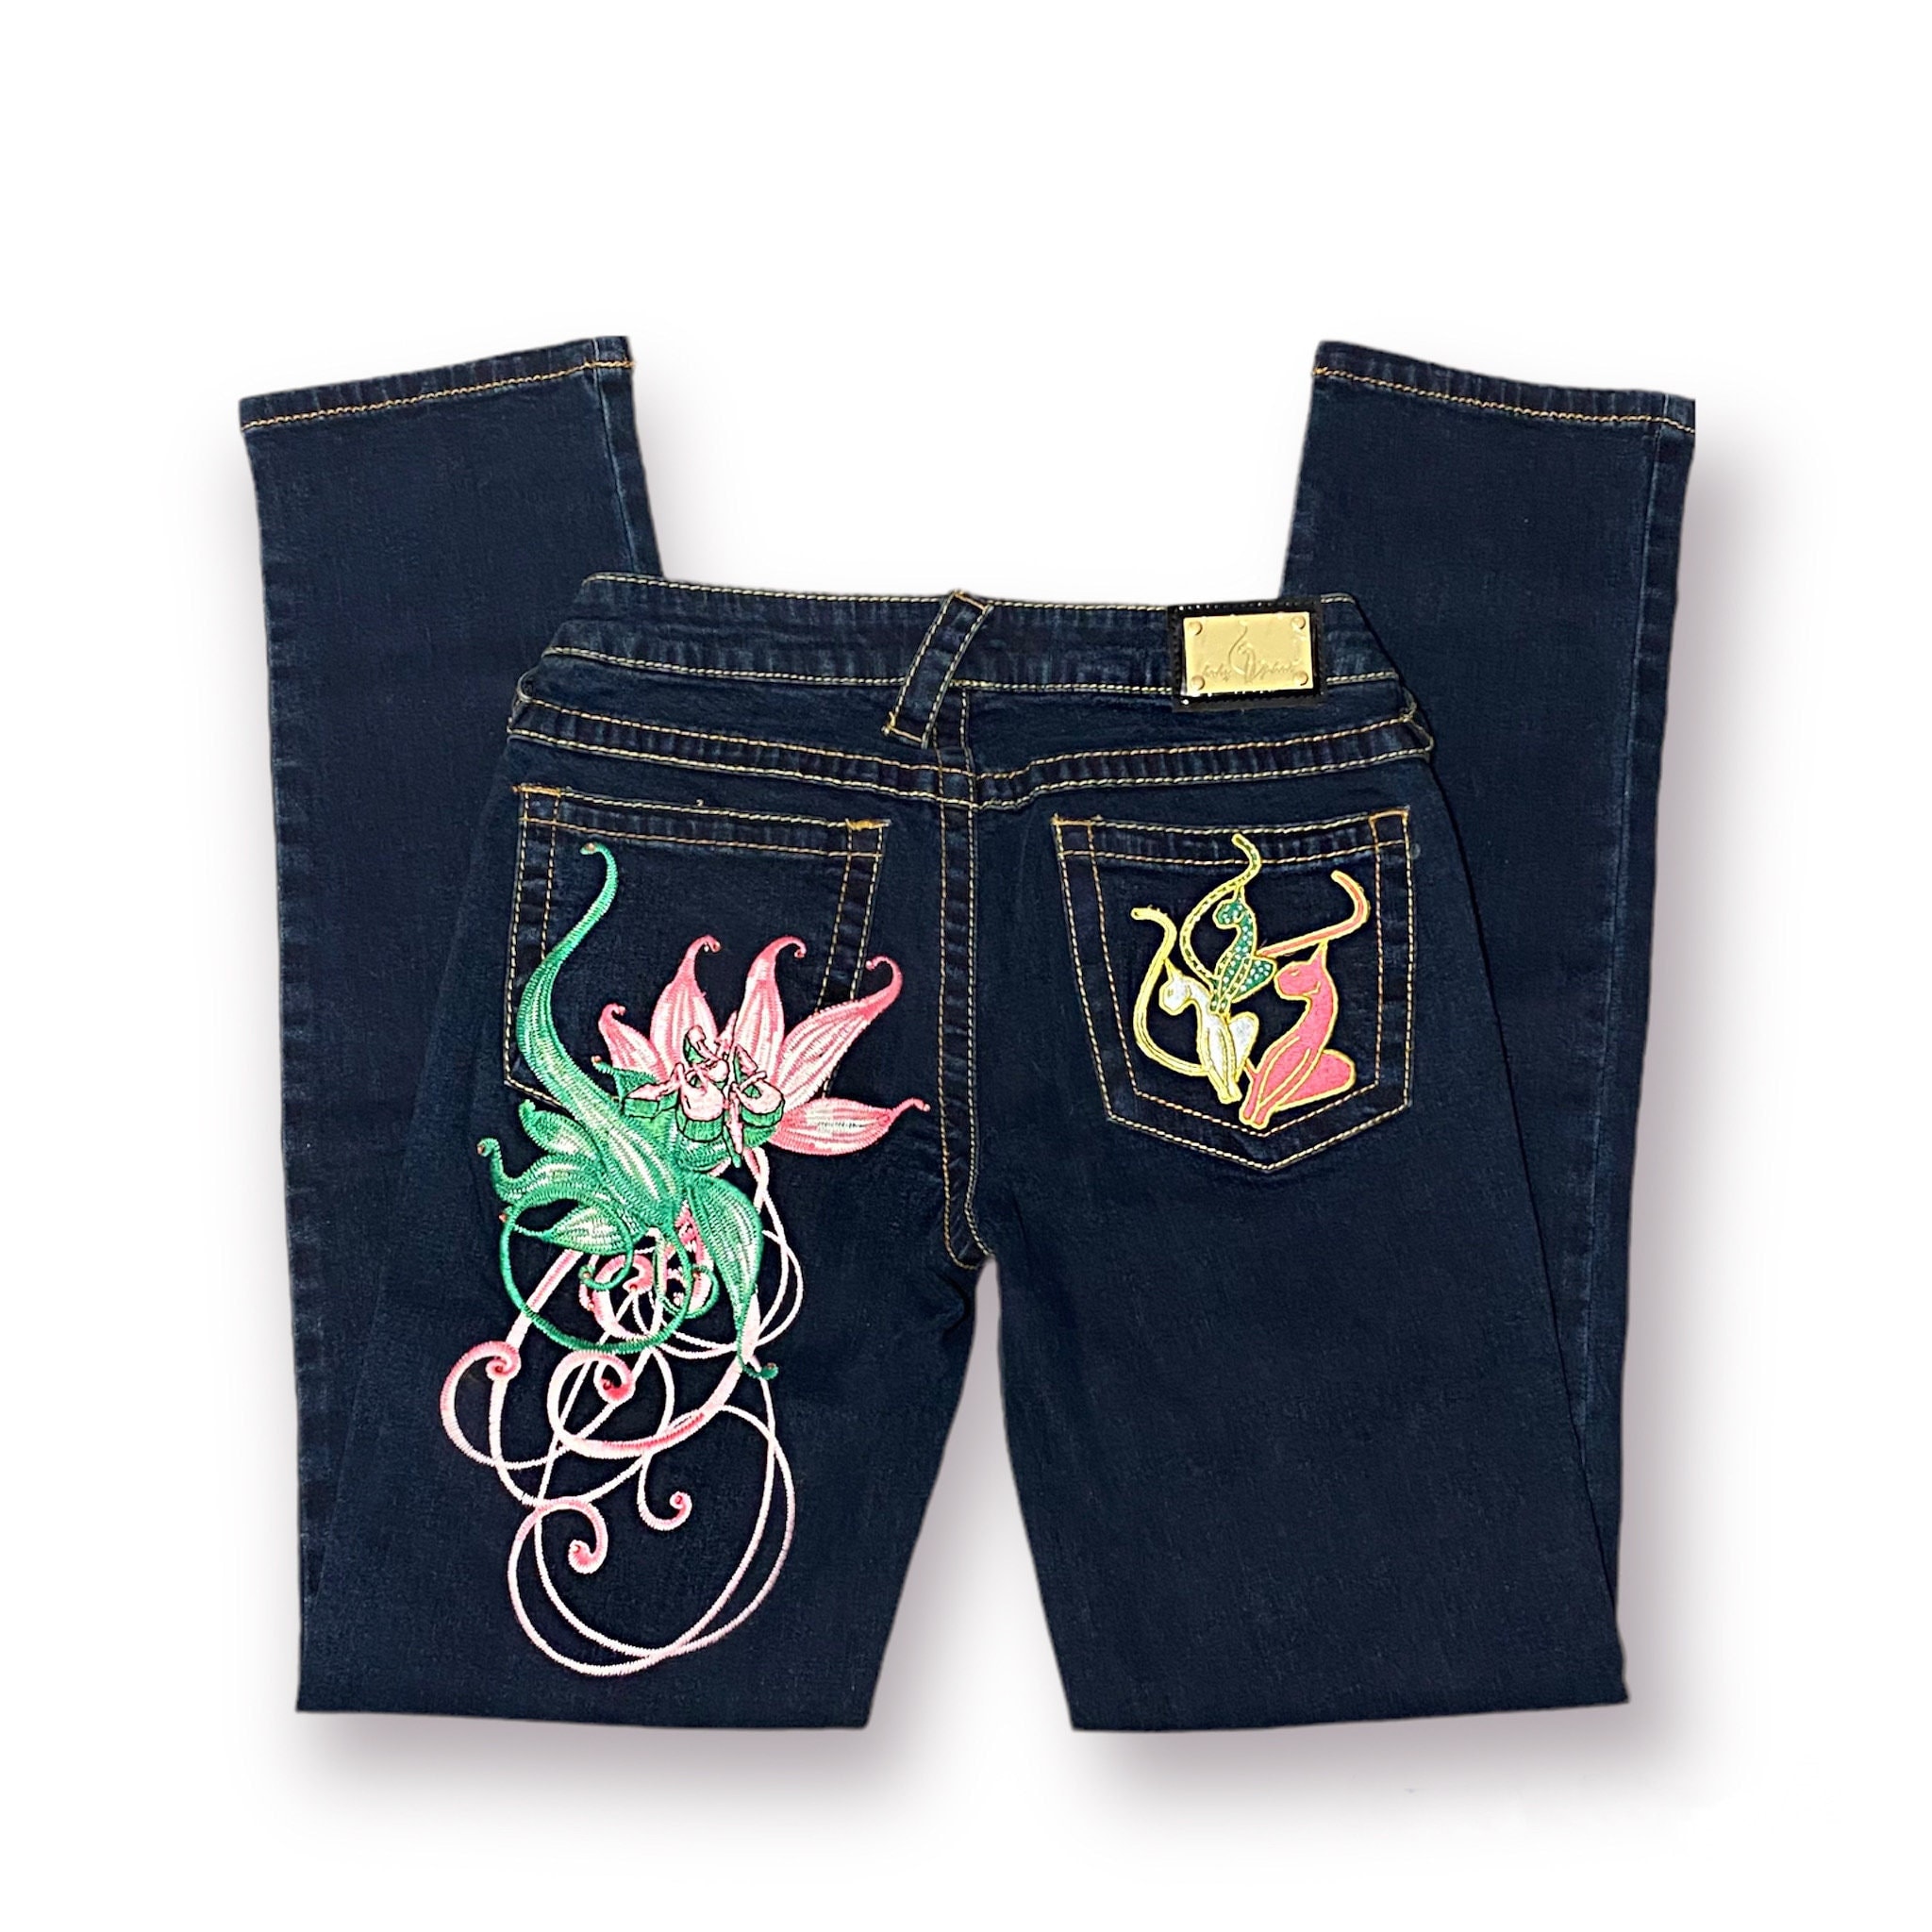 WOMEN FASHION Jeans Embroidery Black XS discount 74% Pull&Bear shorts jeans 